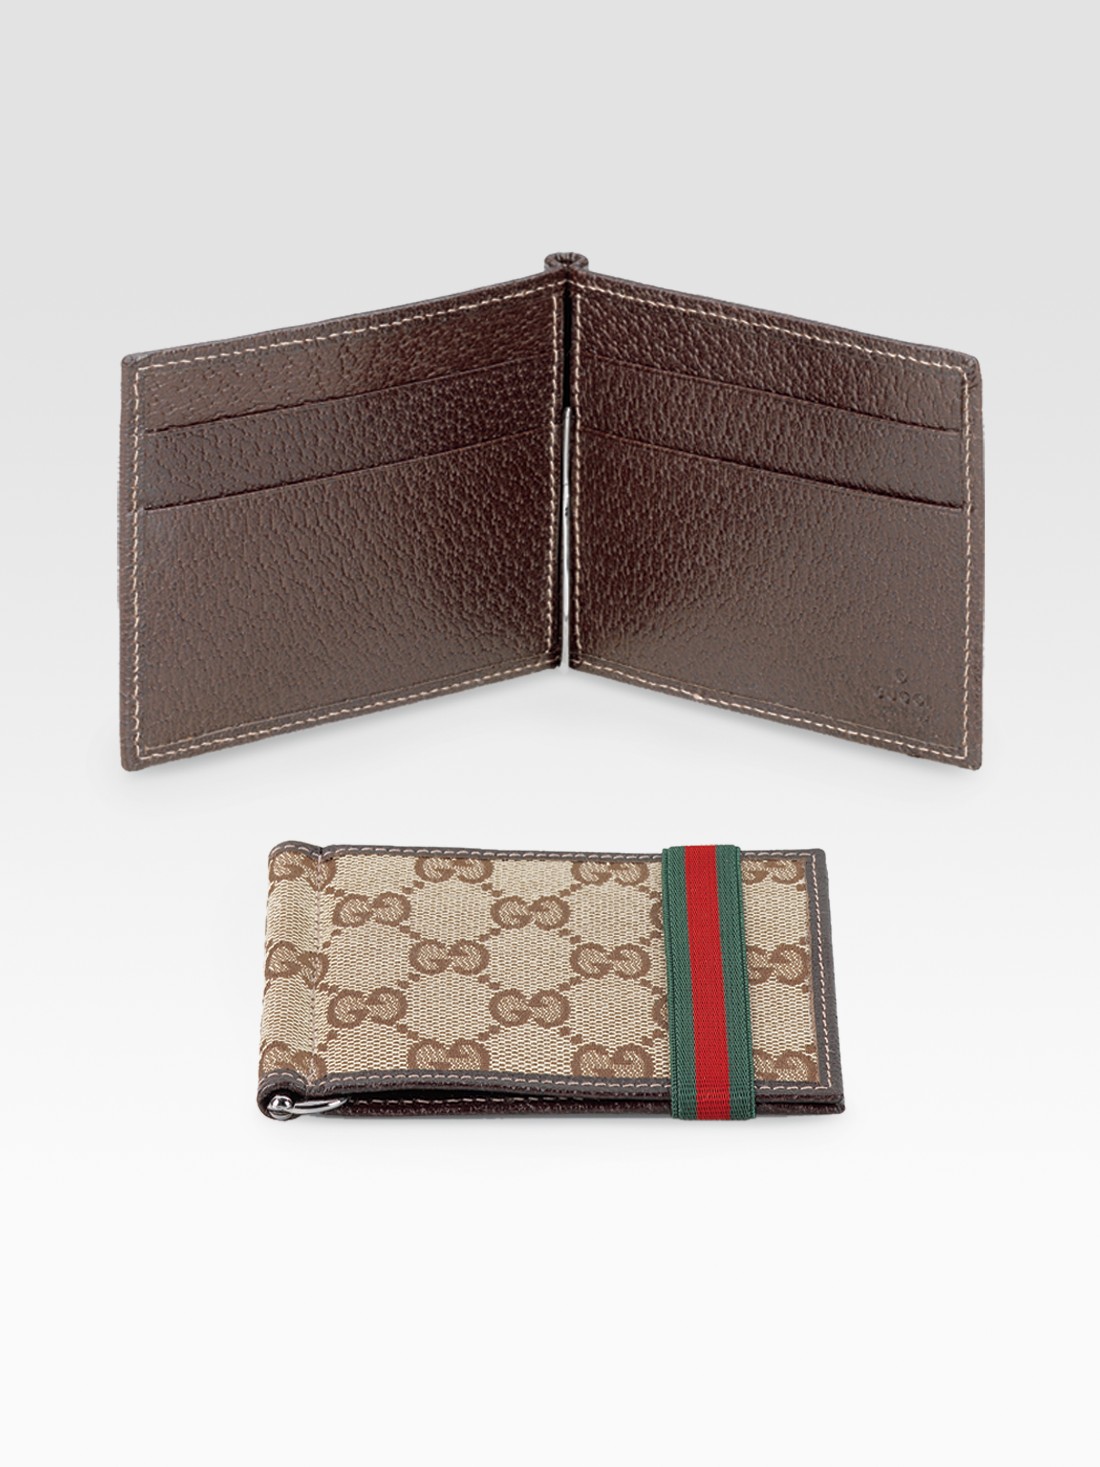 Lyst - Gucci Money Clip Wallet in Natural for Men